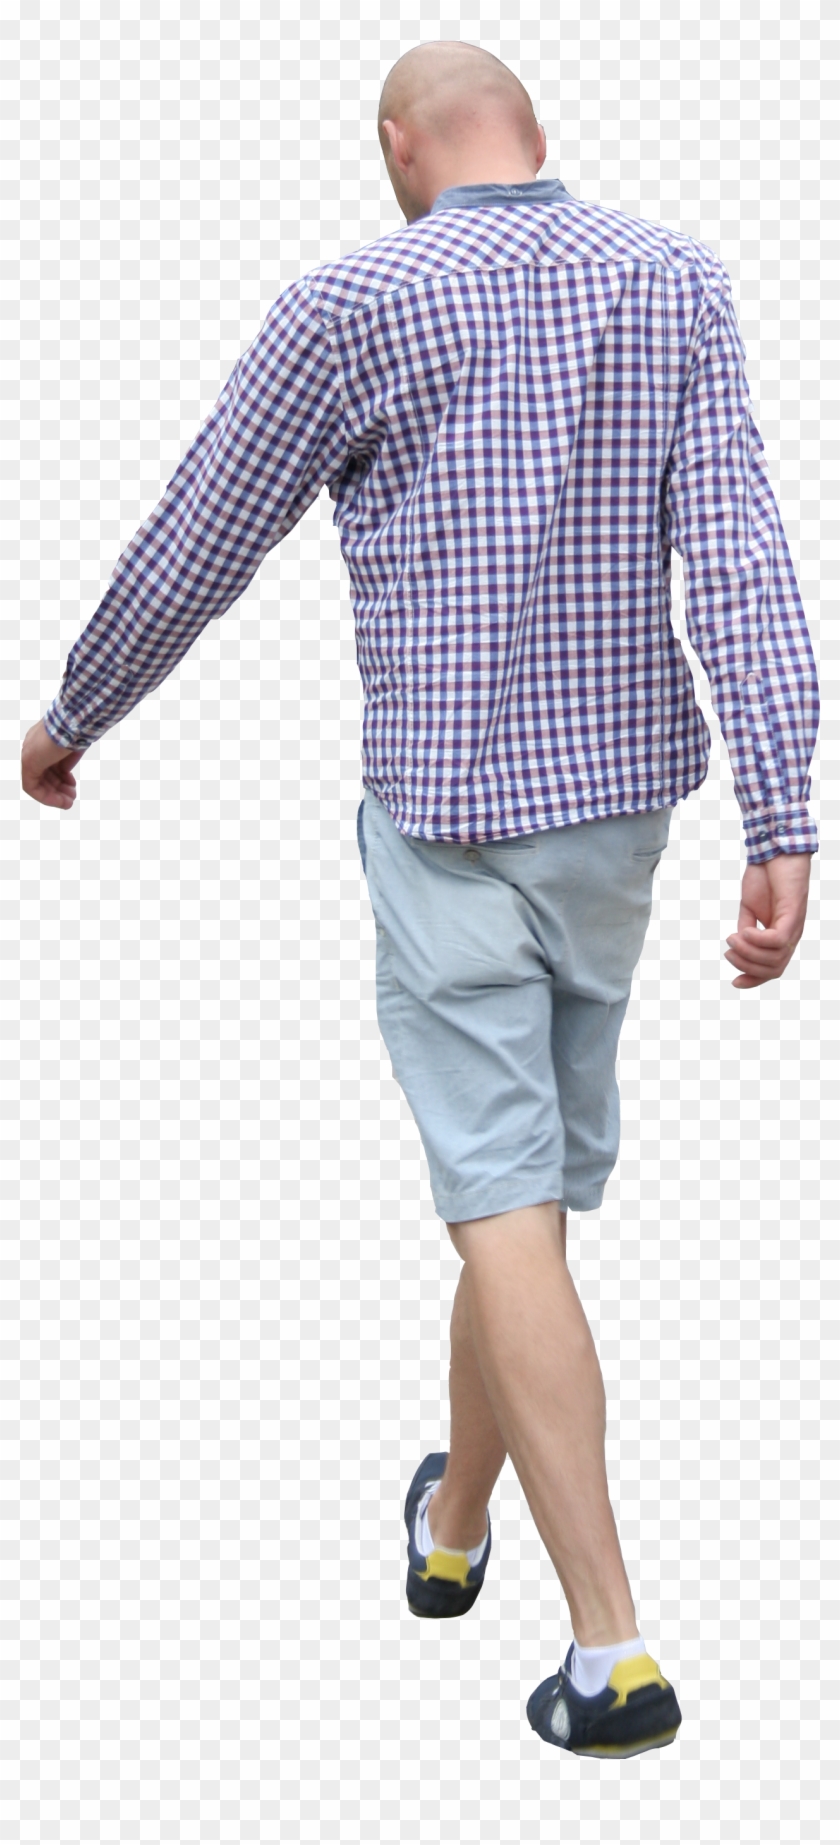 https://www.pngfind.com/pngs/m/562-5627482_cut-out-man-walking-png-png-download-walking.png